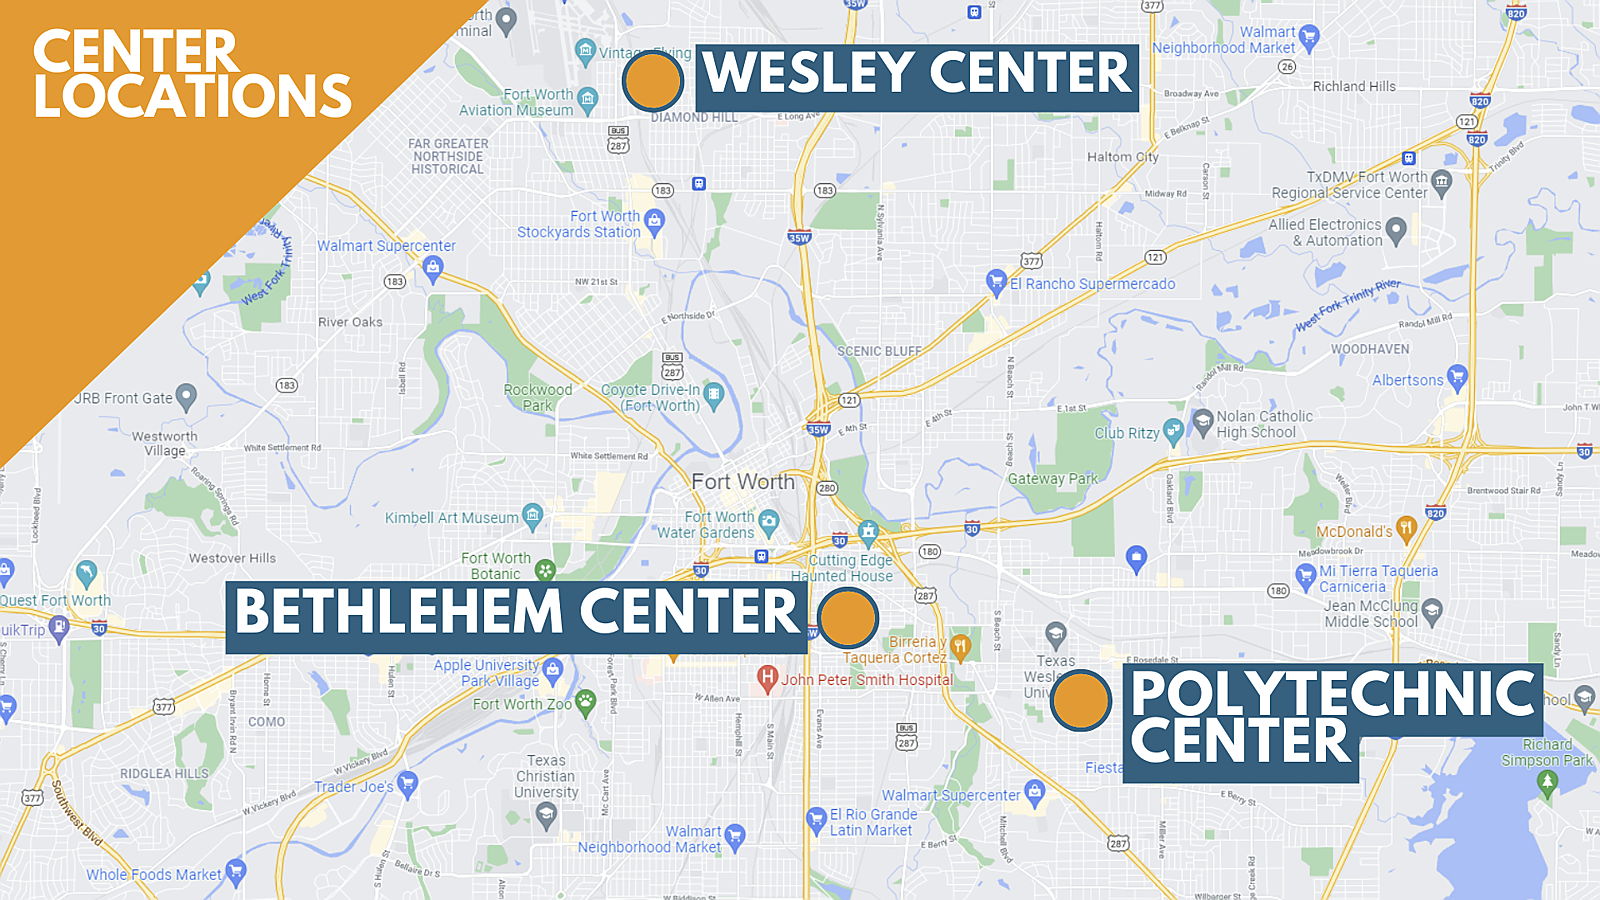 Map of Fort Worth indicating location of the Bethlehem, Polytechnic, and Wesley Centers